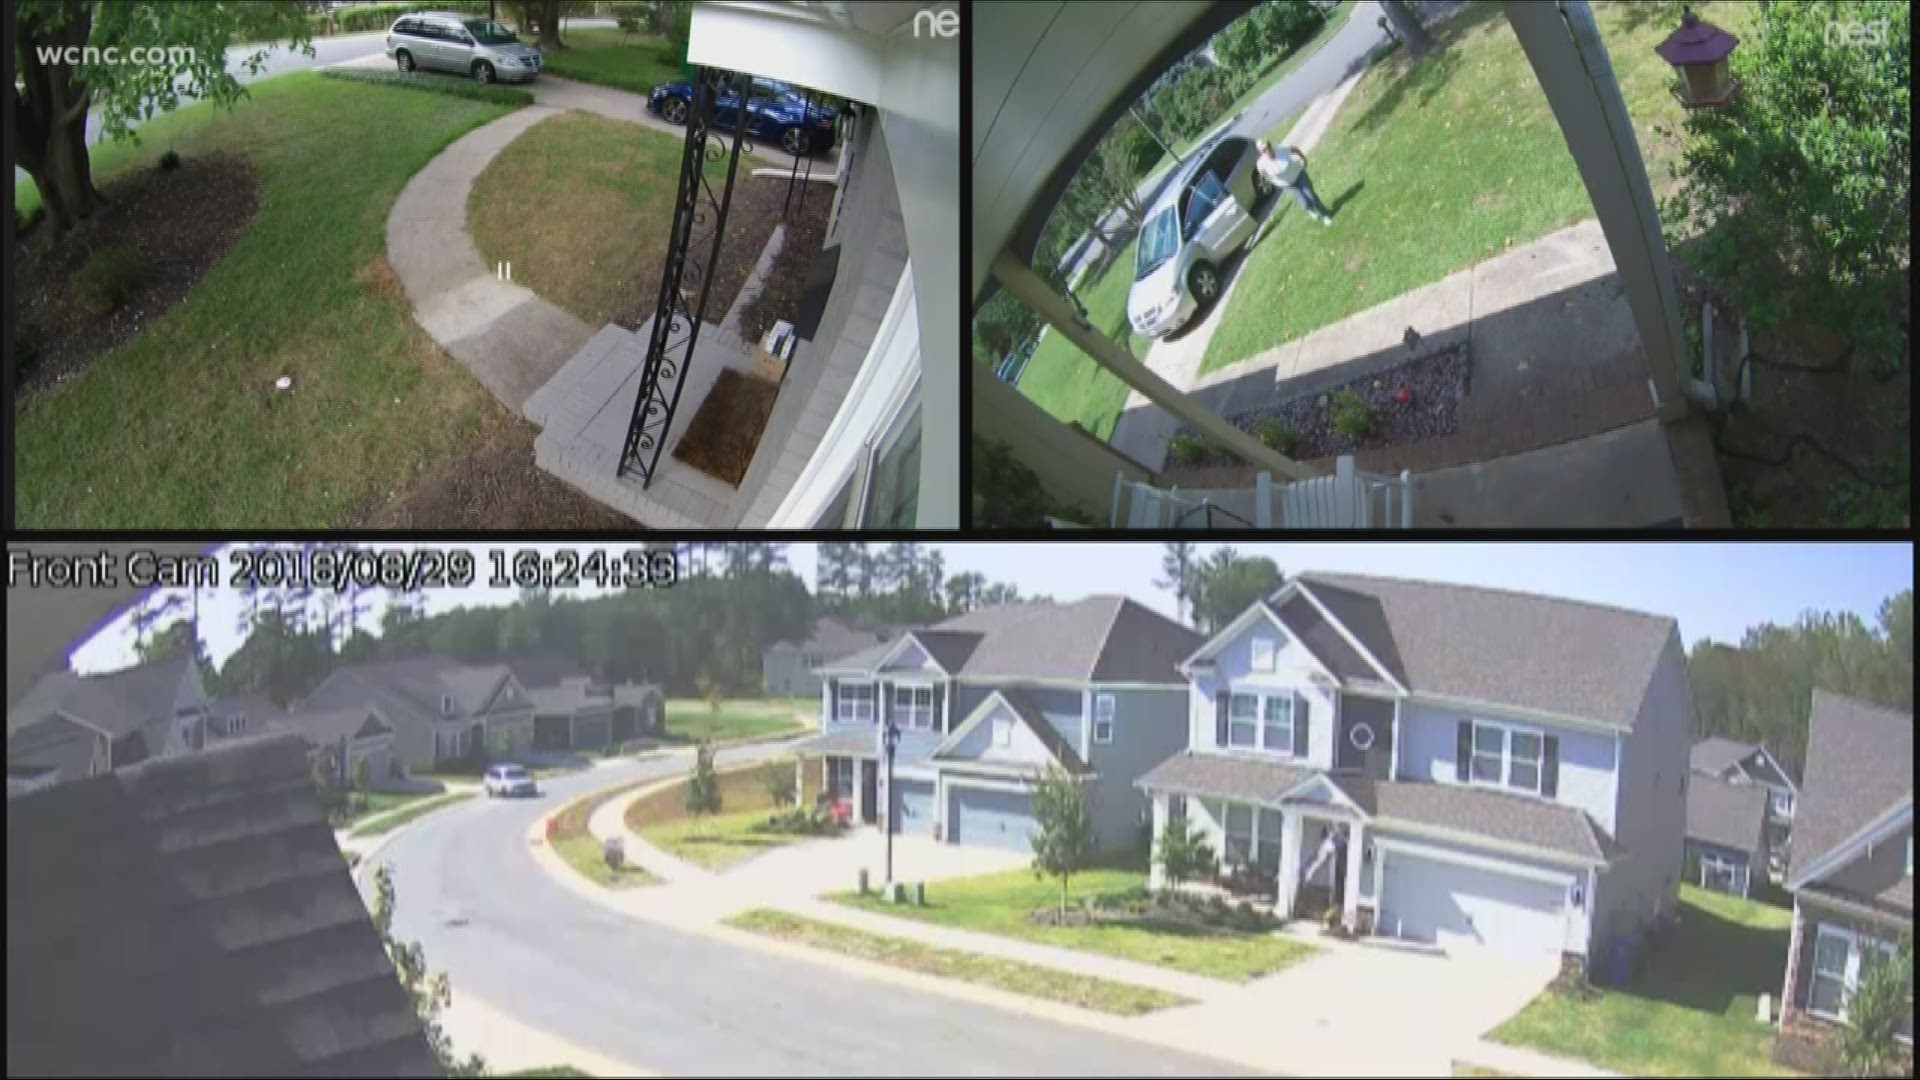 The "Granny Porch Pirate" was spotted swiping packages off the porches of three homes.